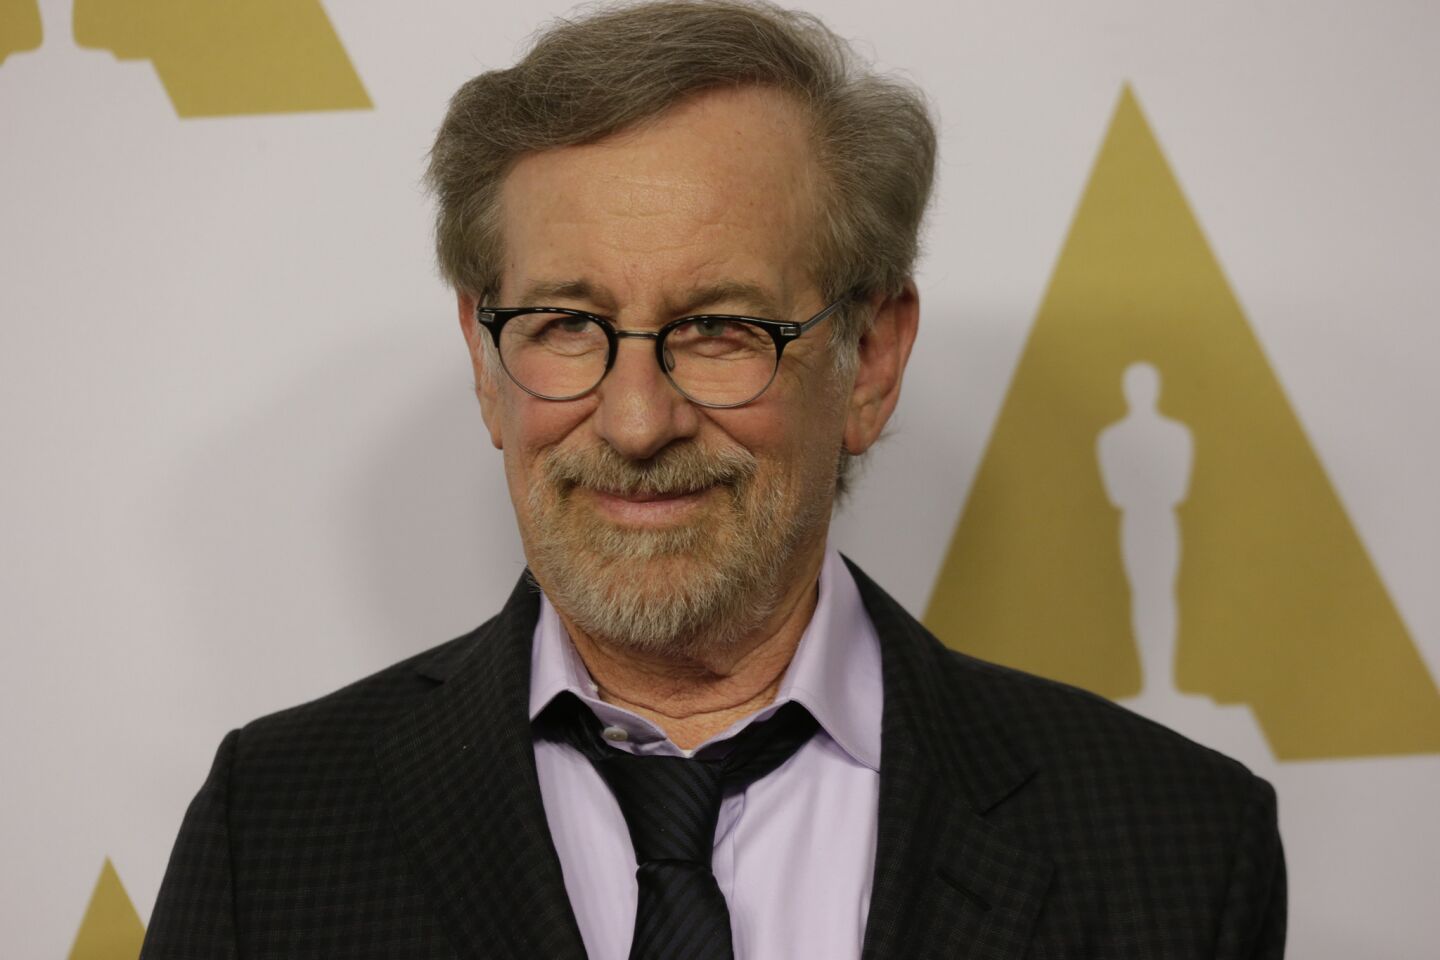 Steven Spielberg arrives for the 88th annual Academy Awards luncheon at the Beverly Hilton Hotel.